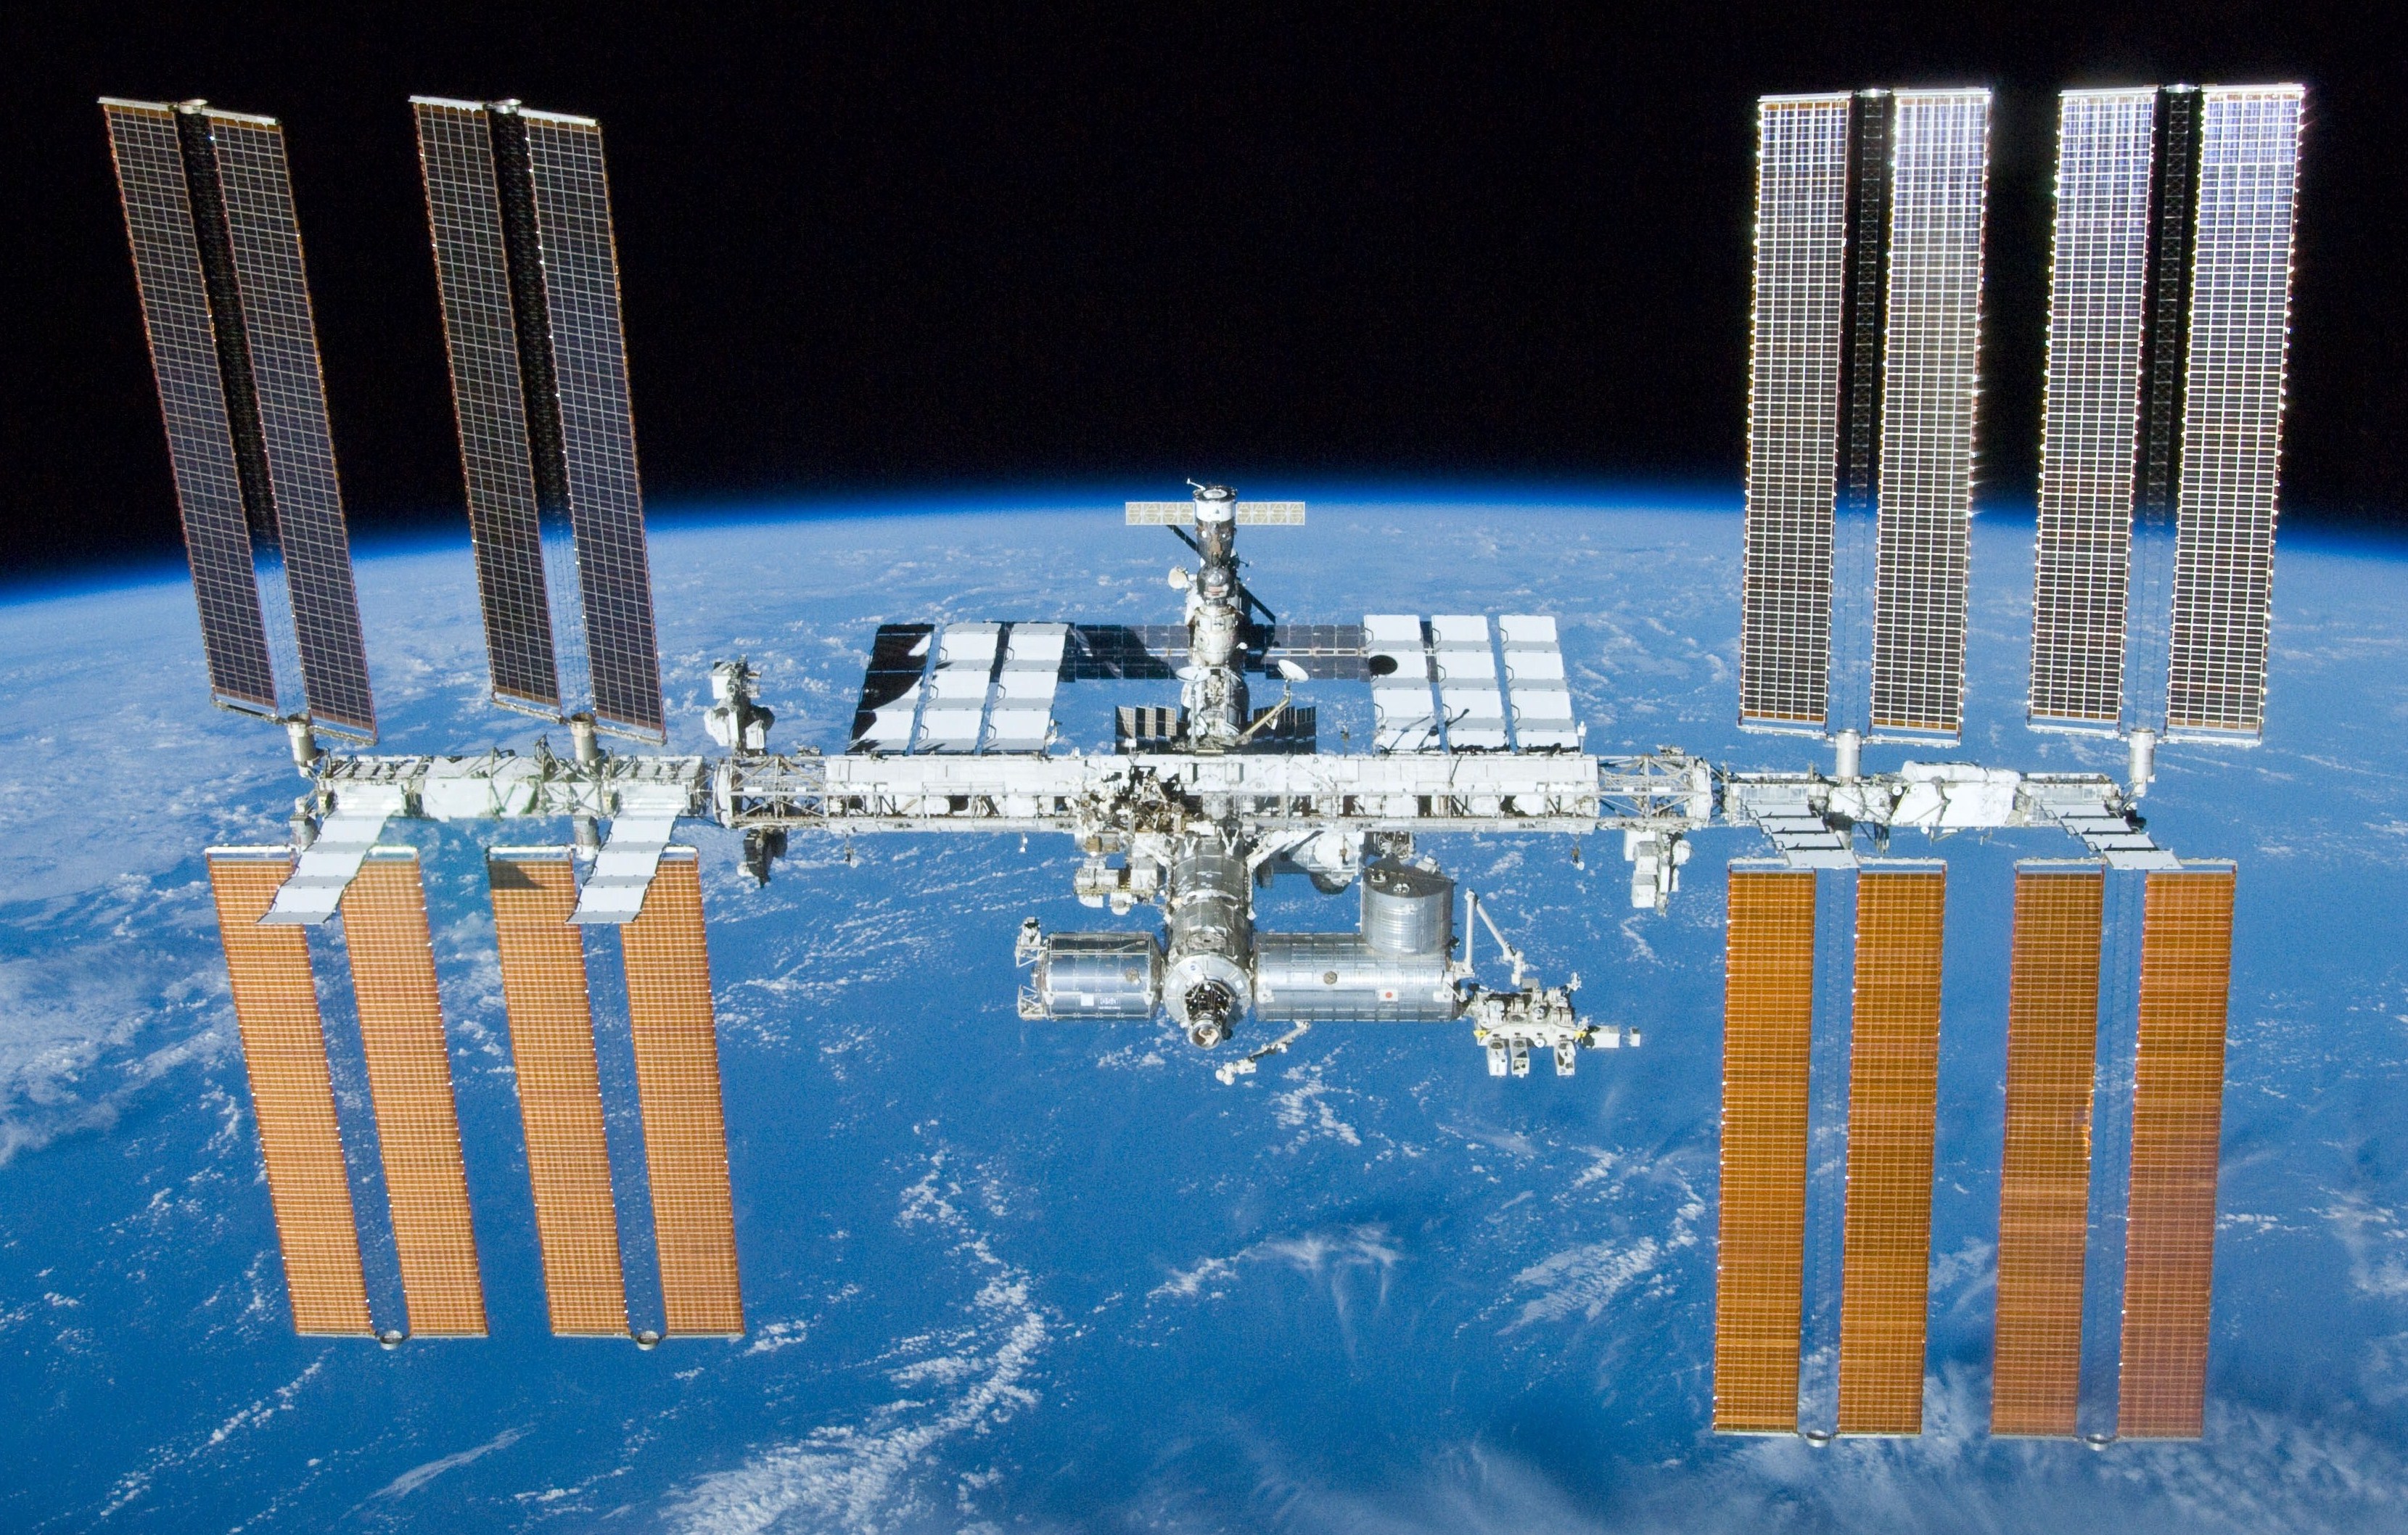 Plankton on the iss: not your typical window washing